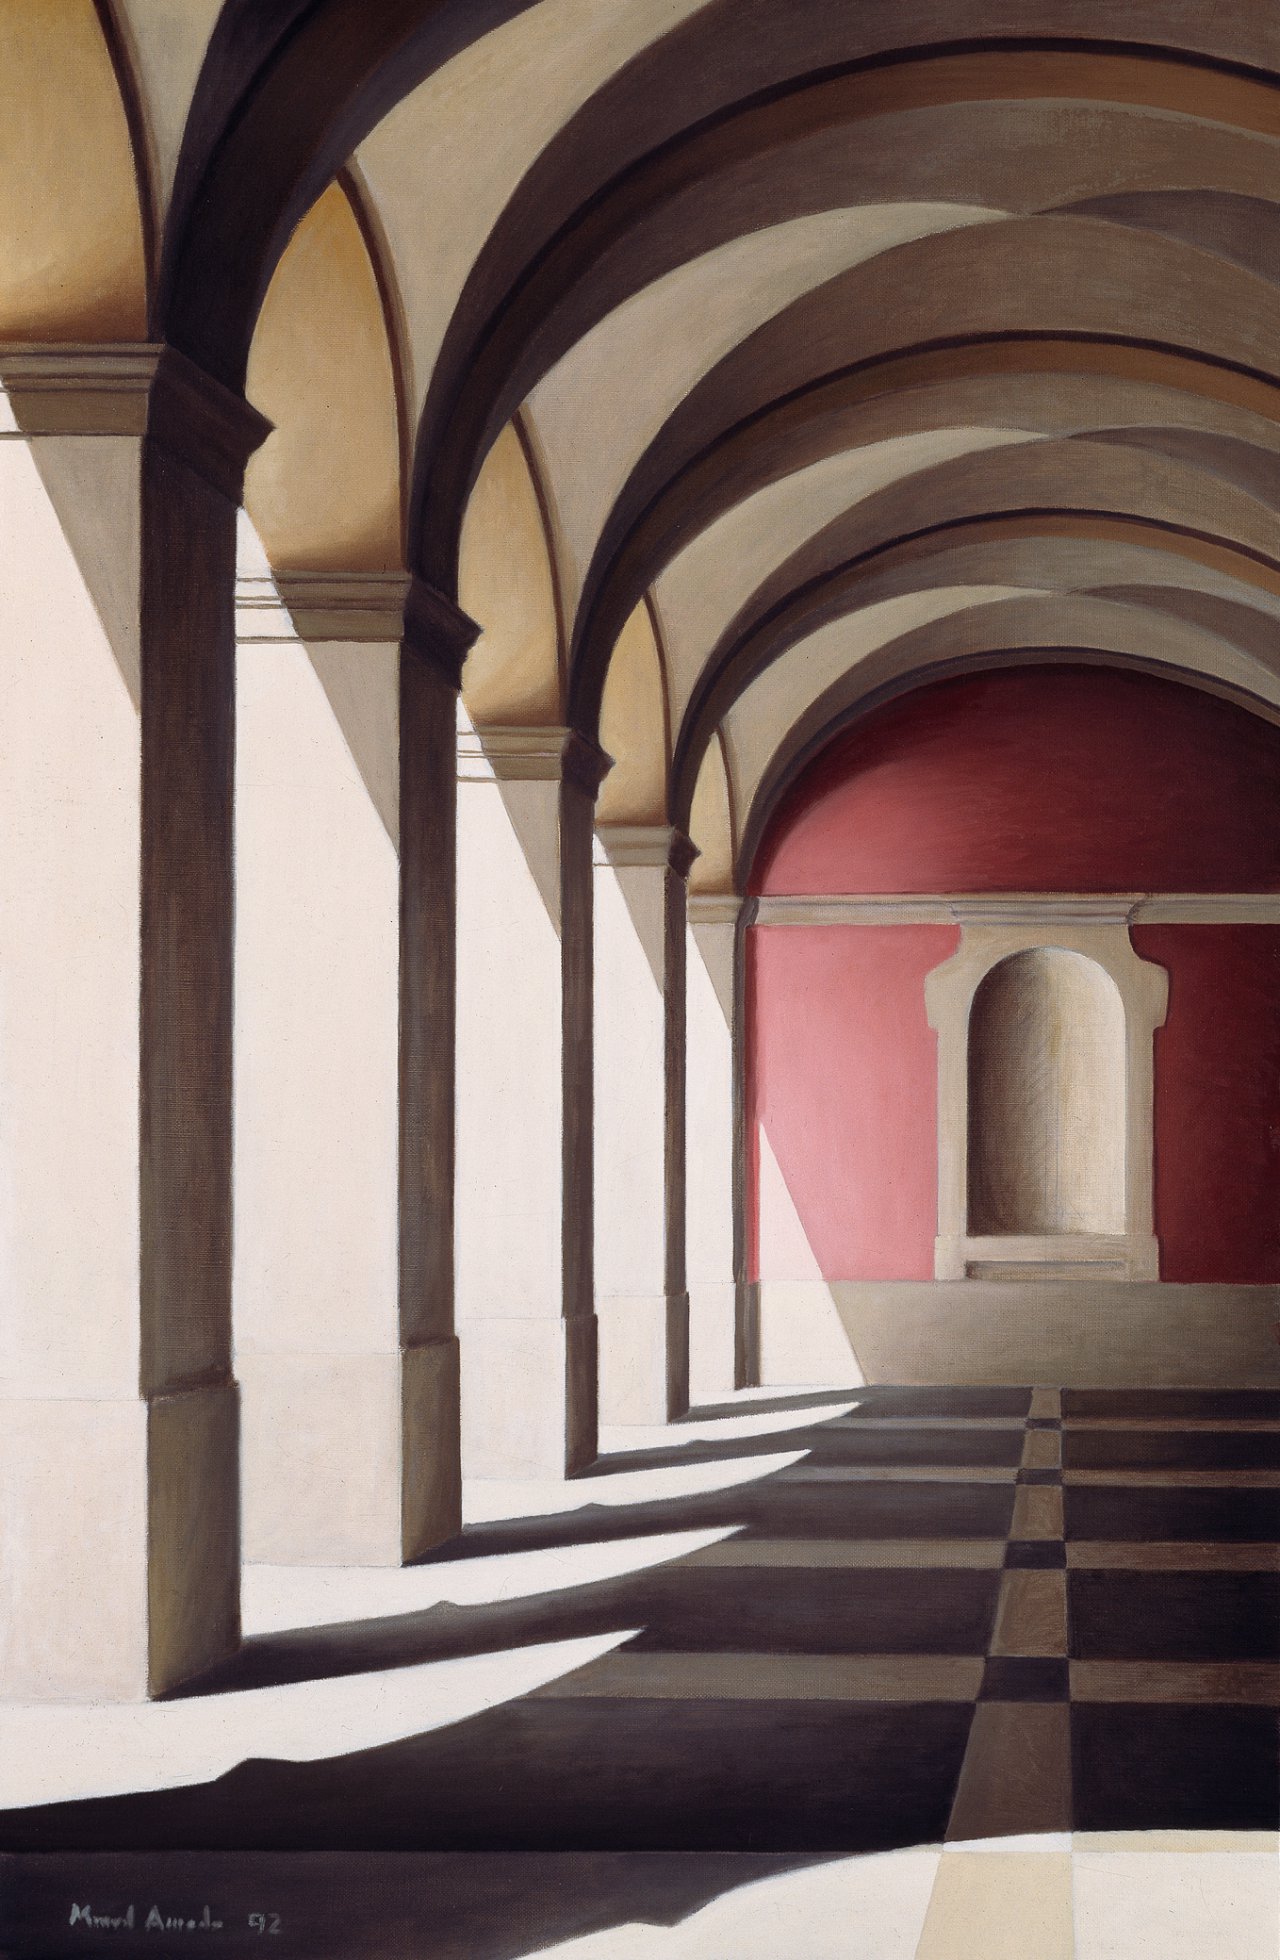 The Arcade (study for The Large Arcade)